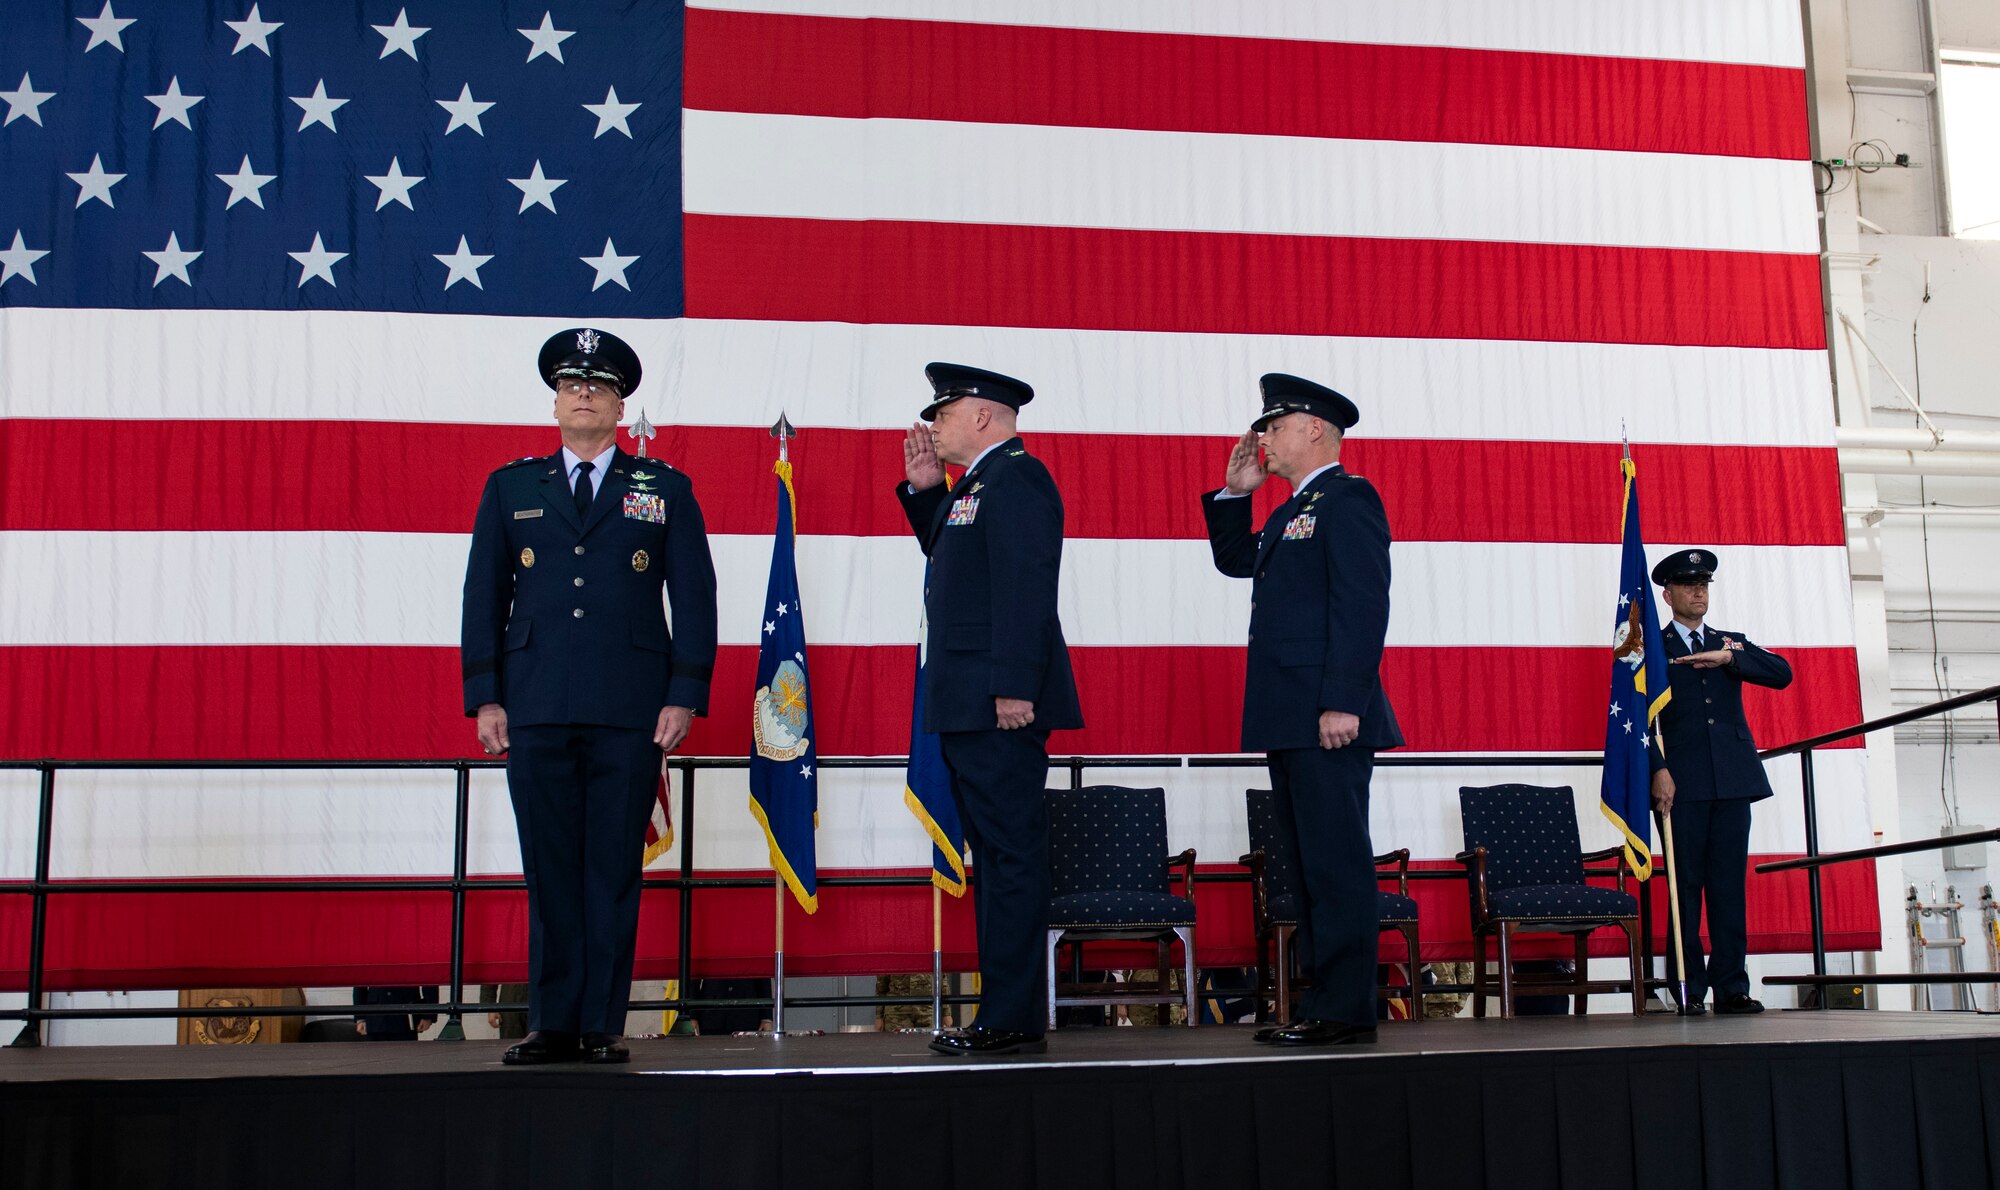 Members of the 509th Bomb Wing, render a salute to U.S. Air Force Maj. Gen. Mark Weatherington, Eighth Air Force and Commander Joint-Global Strike Operations Center, during the 509th BW change of command ceremony, Whiteman Air Force Base, Missouri, June 16, 2021. Eighth Air Force is responsible for the service’s bomber force and airborne nuclear command and control assets. The J-GSOC serves as the central command and control node for all operations within Air Force Global Strike Command, orchestrating warfighting and readiness activities for the Commander, Air Forces Strategic. (U.S. Air Force photo by Airman First Class Victoria Hommel)